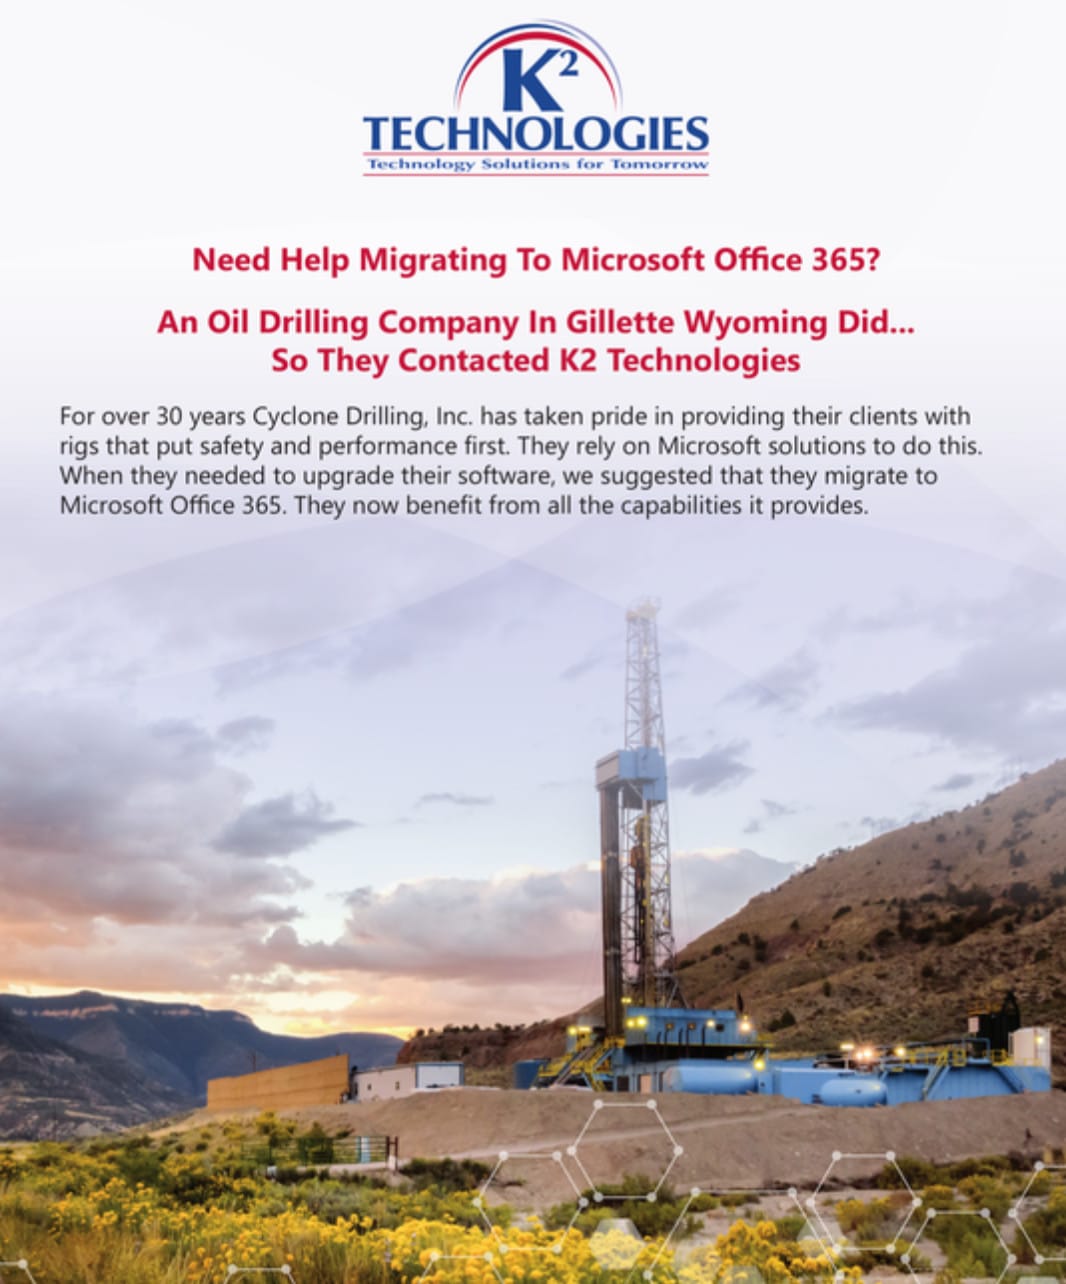 7 Reasons Oil & Gas Drilling Companies Are Migrating To Microsoft Office 365